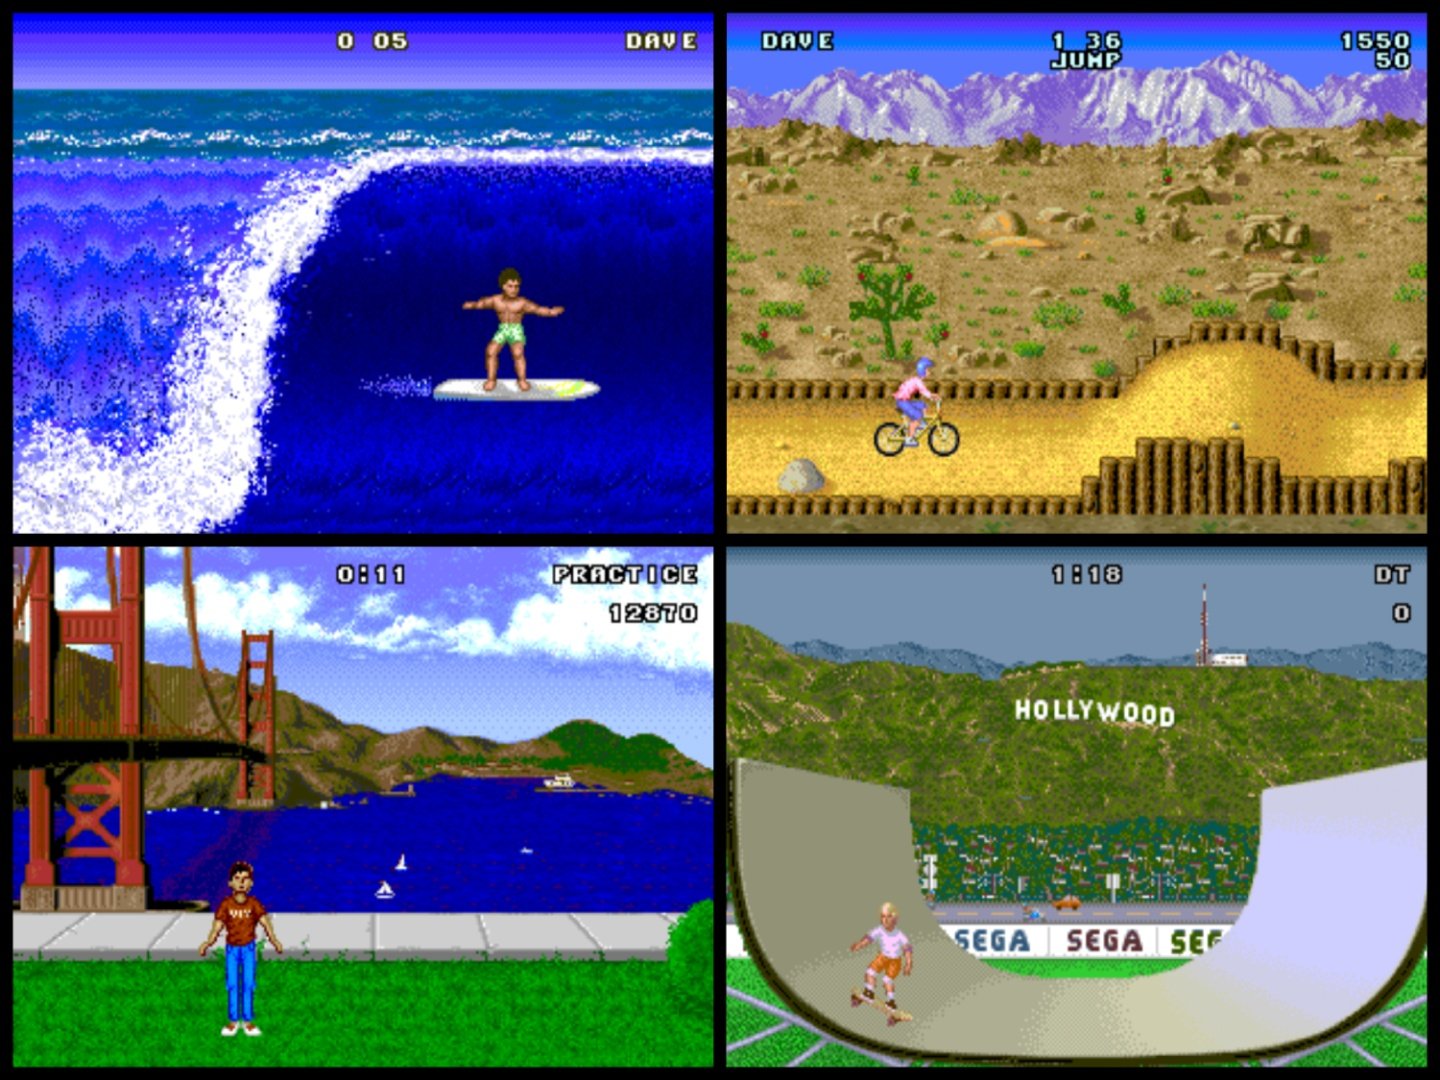 The Megadrive version of California Games